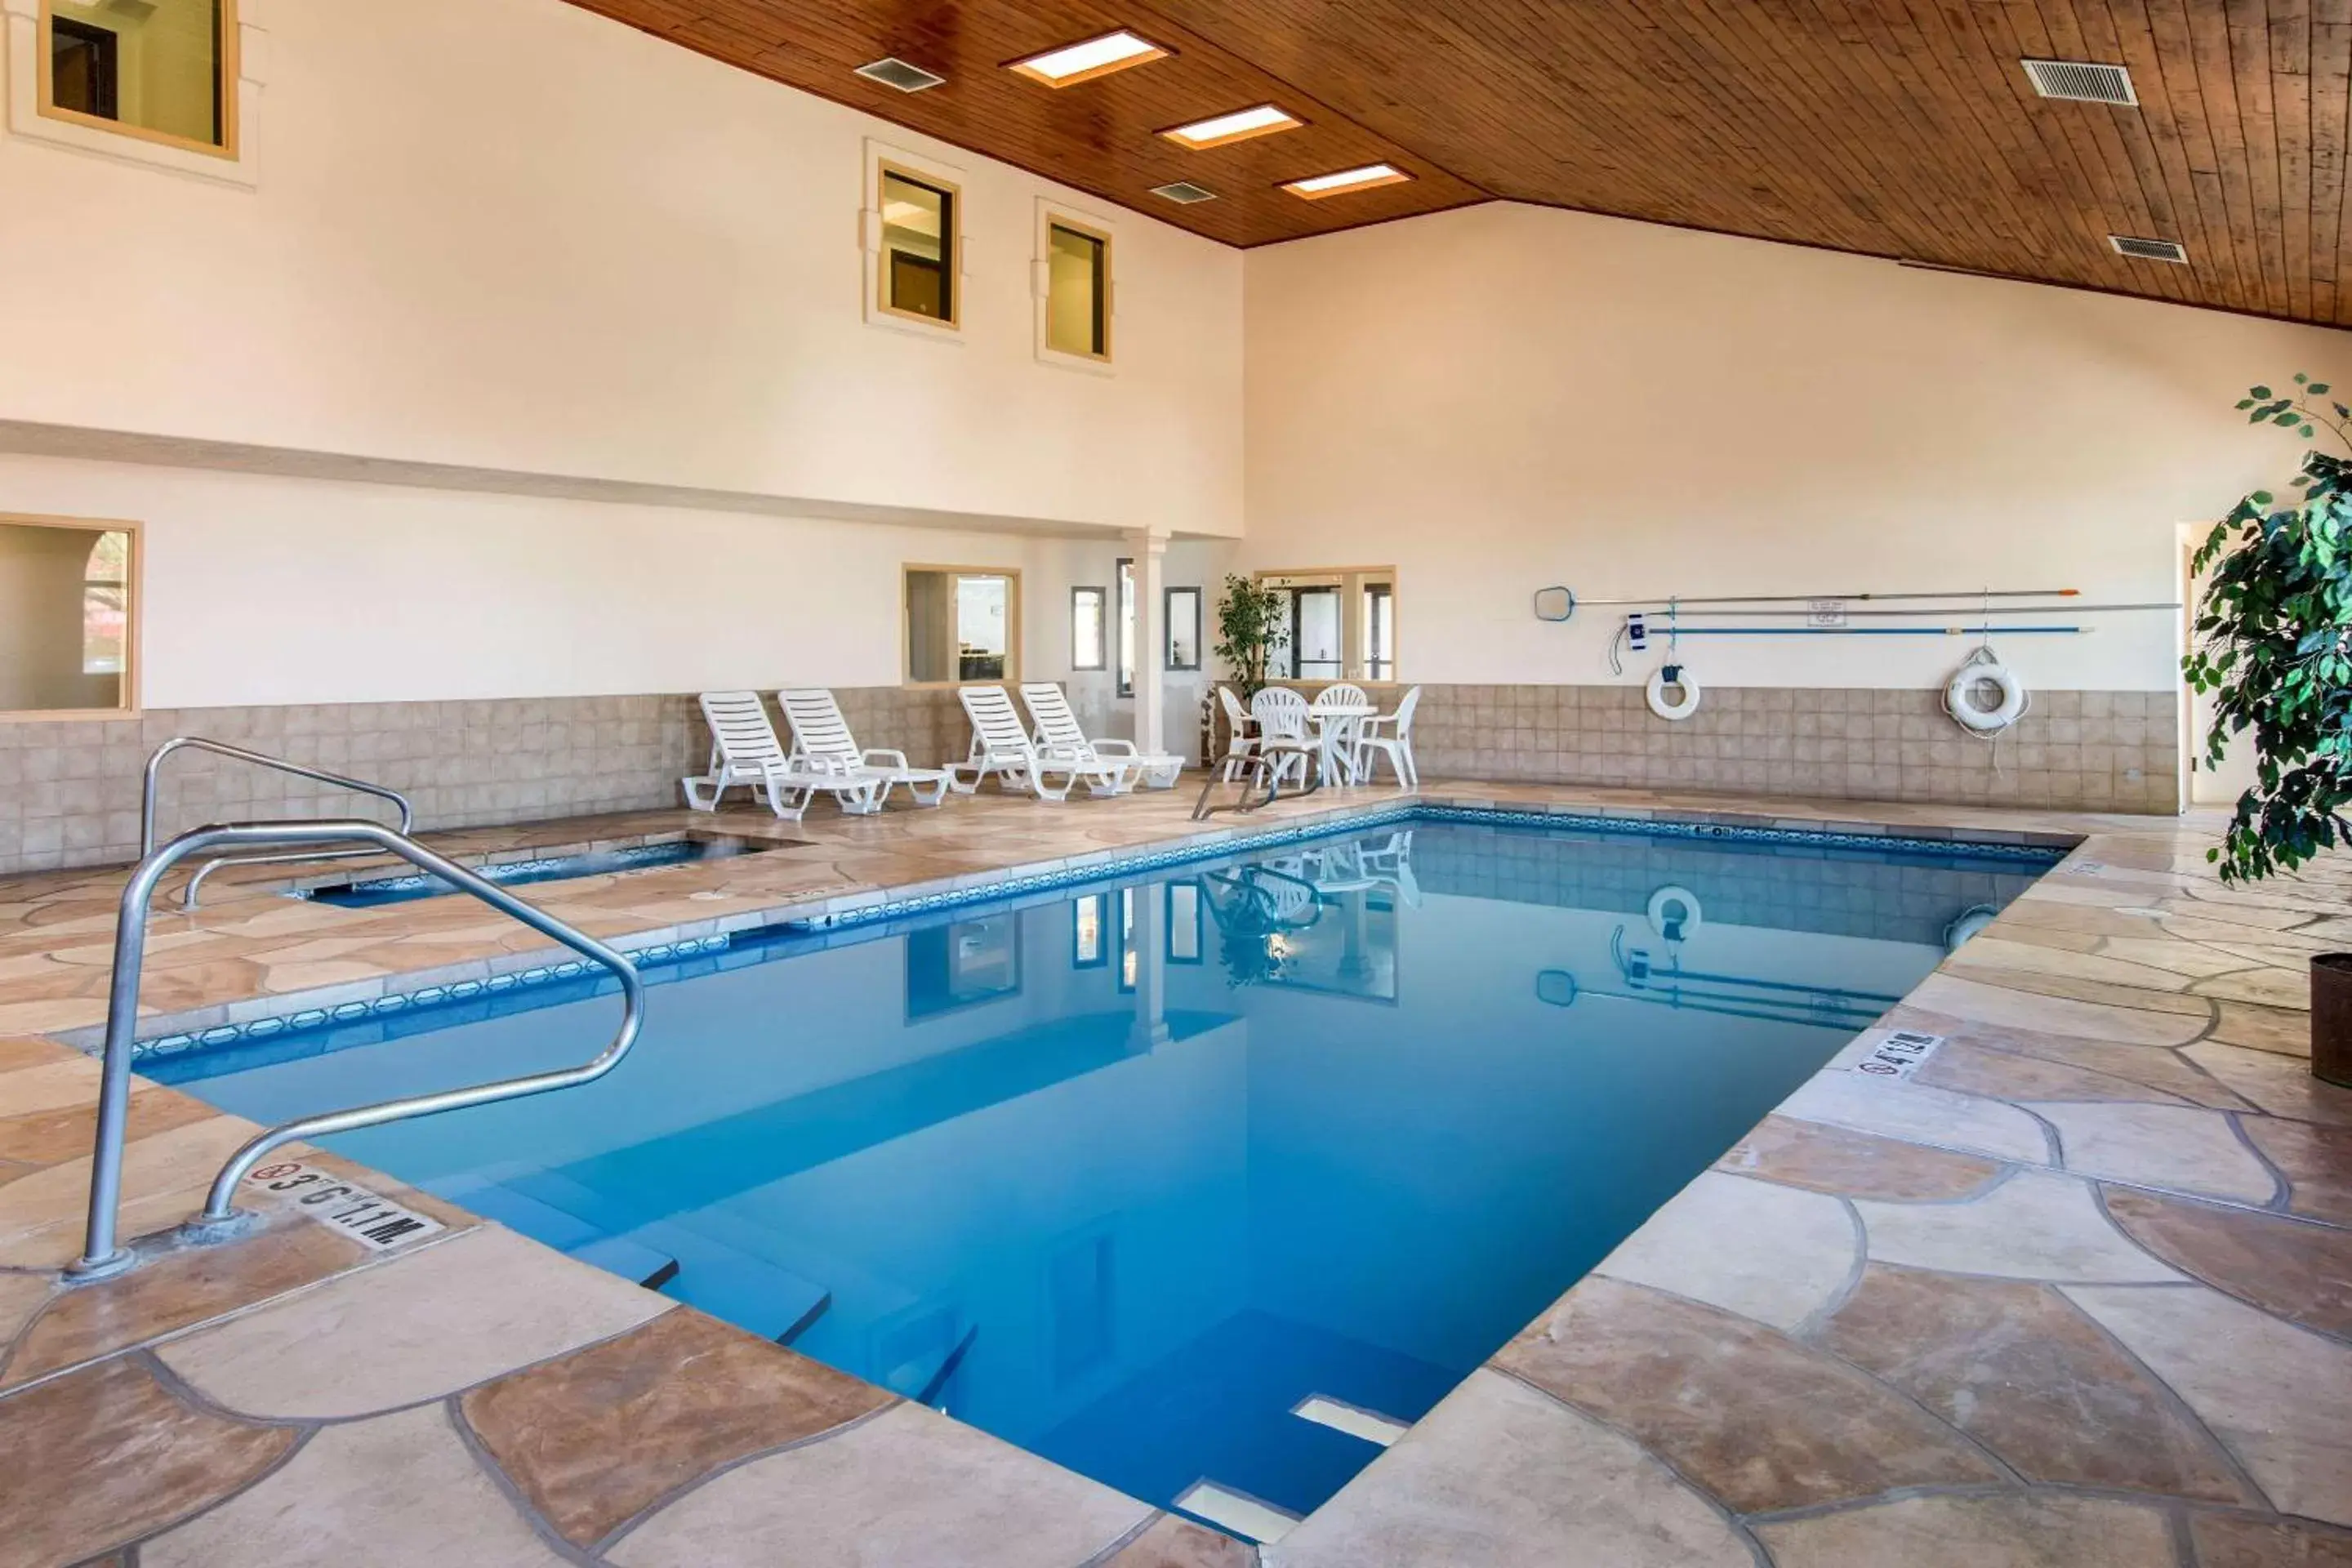 On site, Swimming Pool in Quality Inn & Suites Albuquerque North near Balloon Fiesta Park